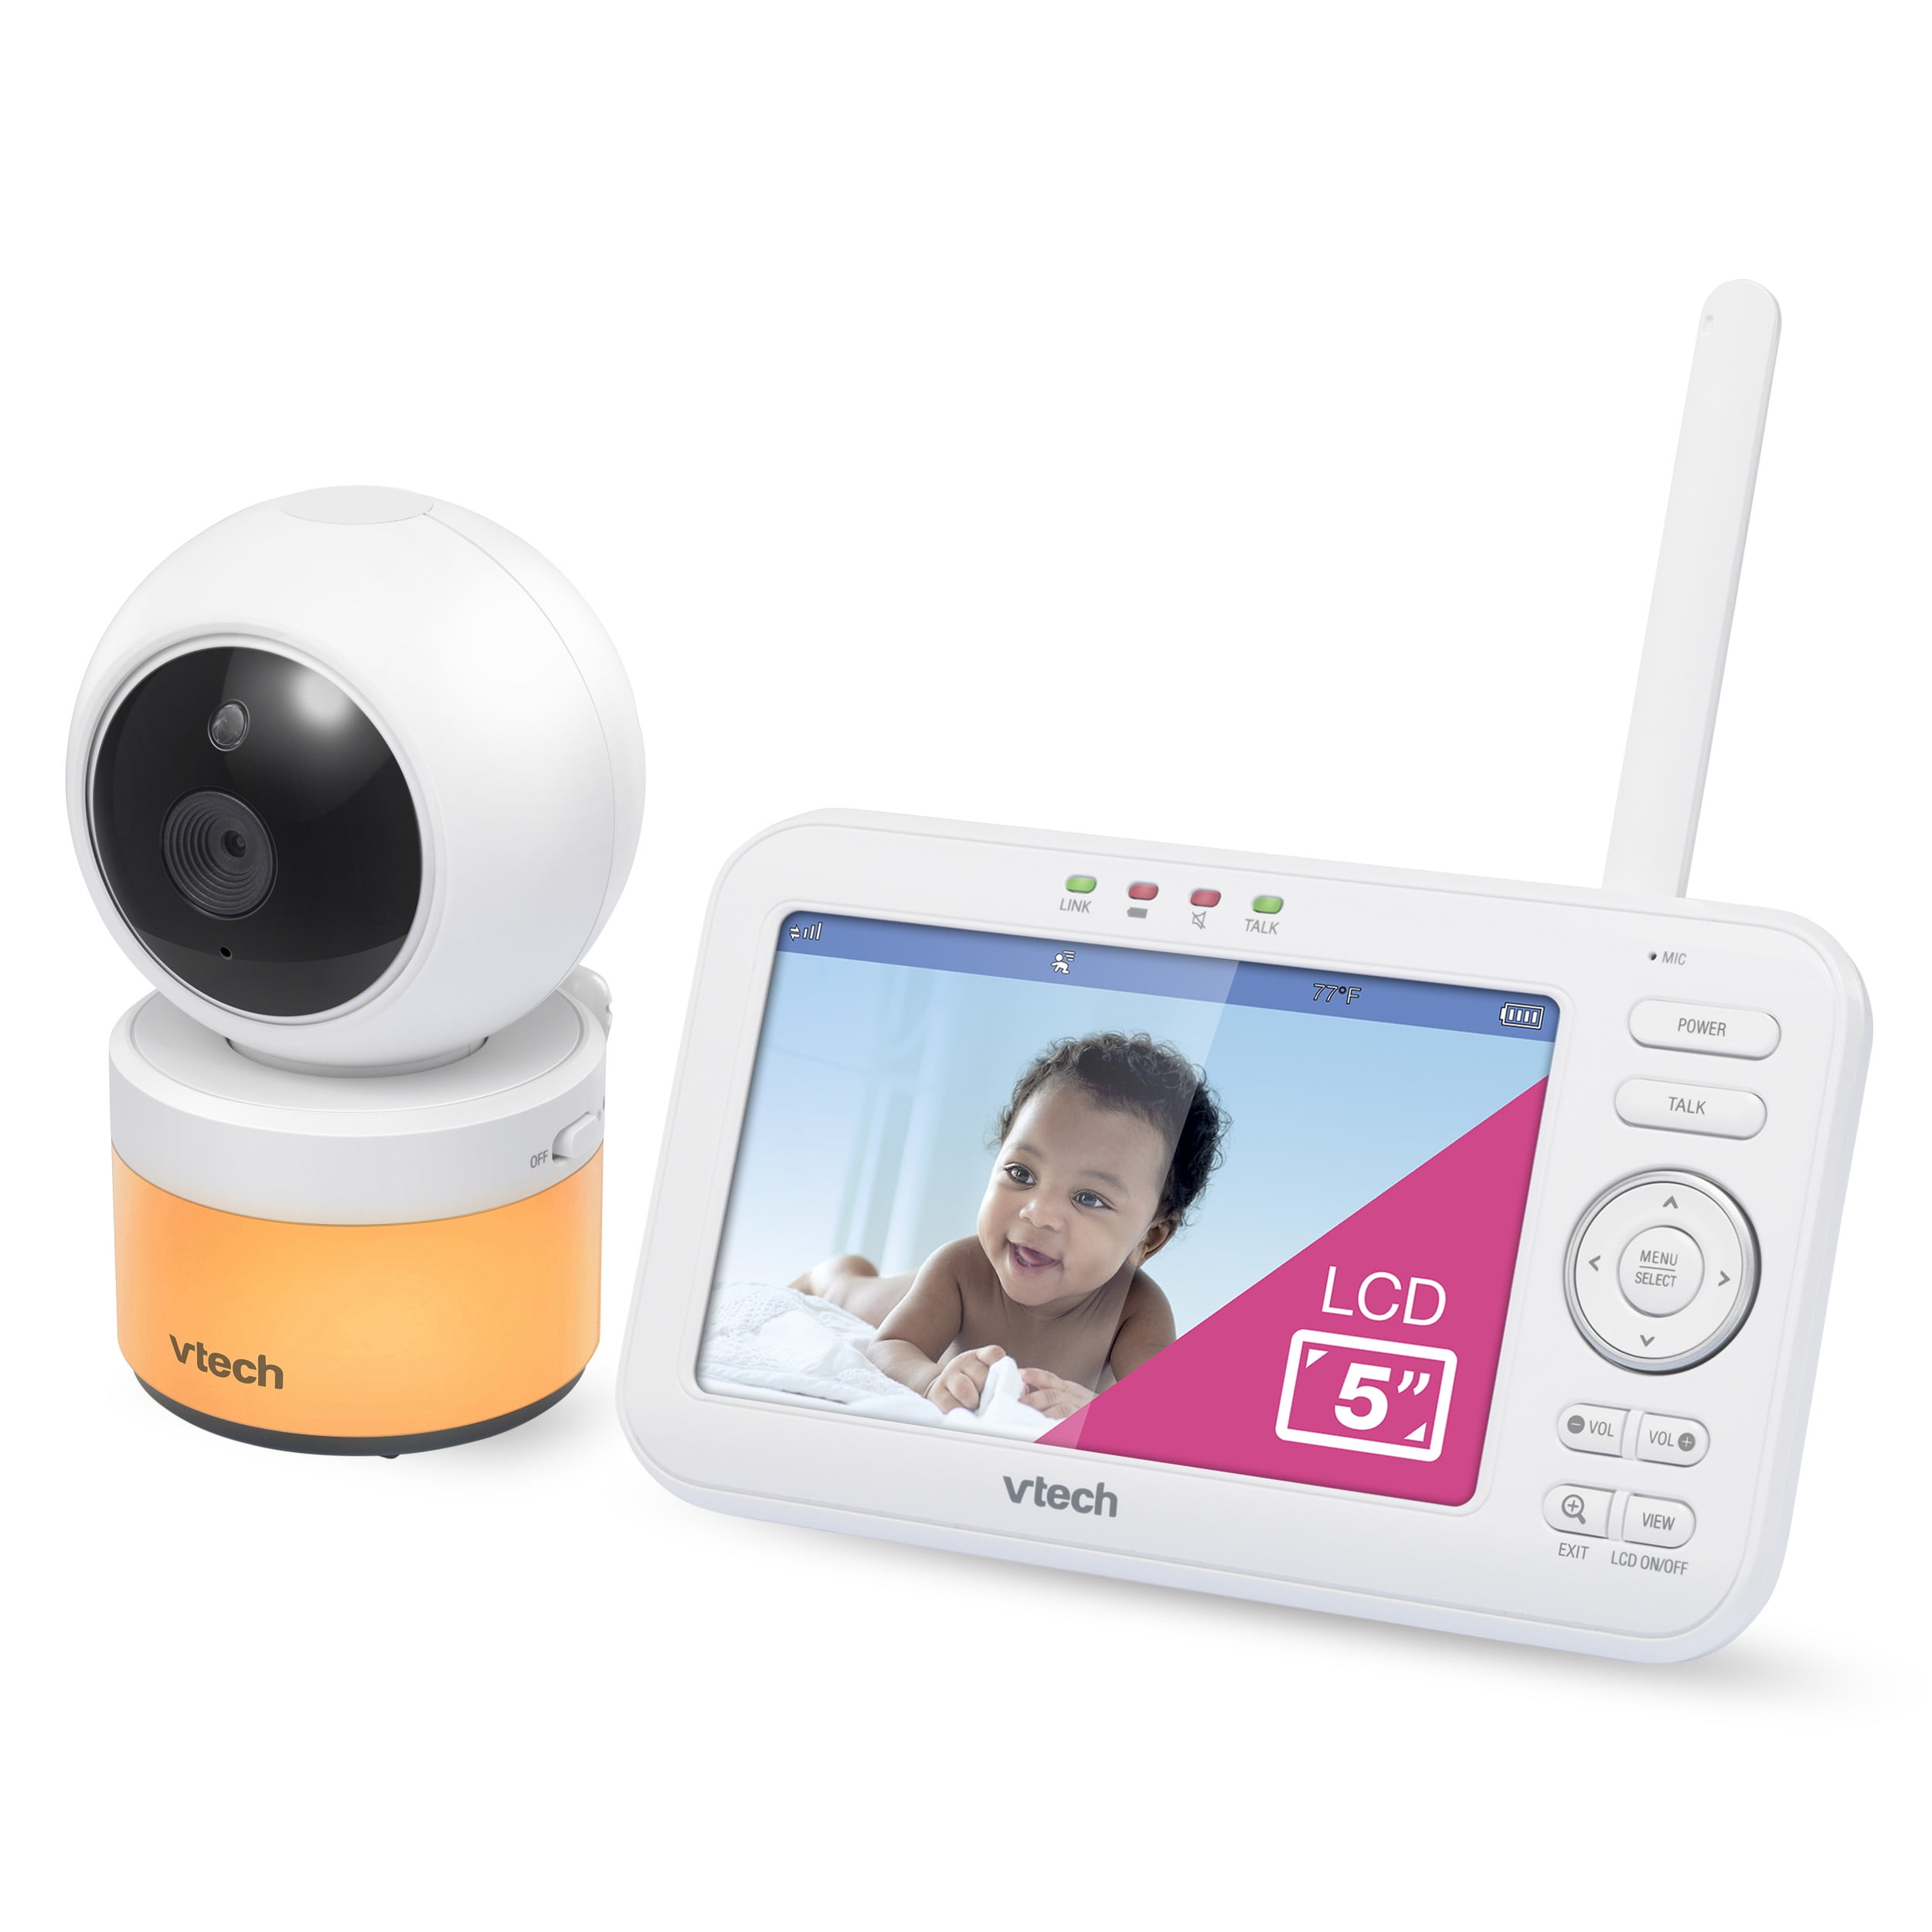 Vtech Vm5263 5 Digitial Video Baby Monitor With Pan And Tilt And Night Light Walmart Com